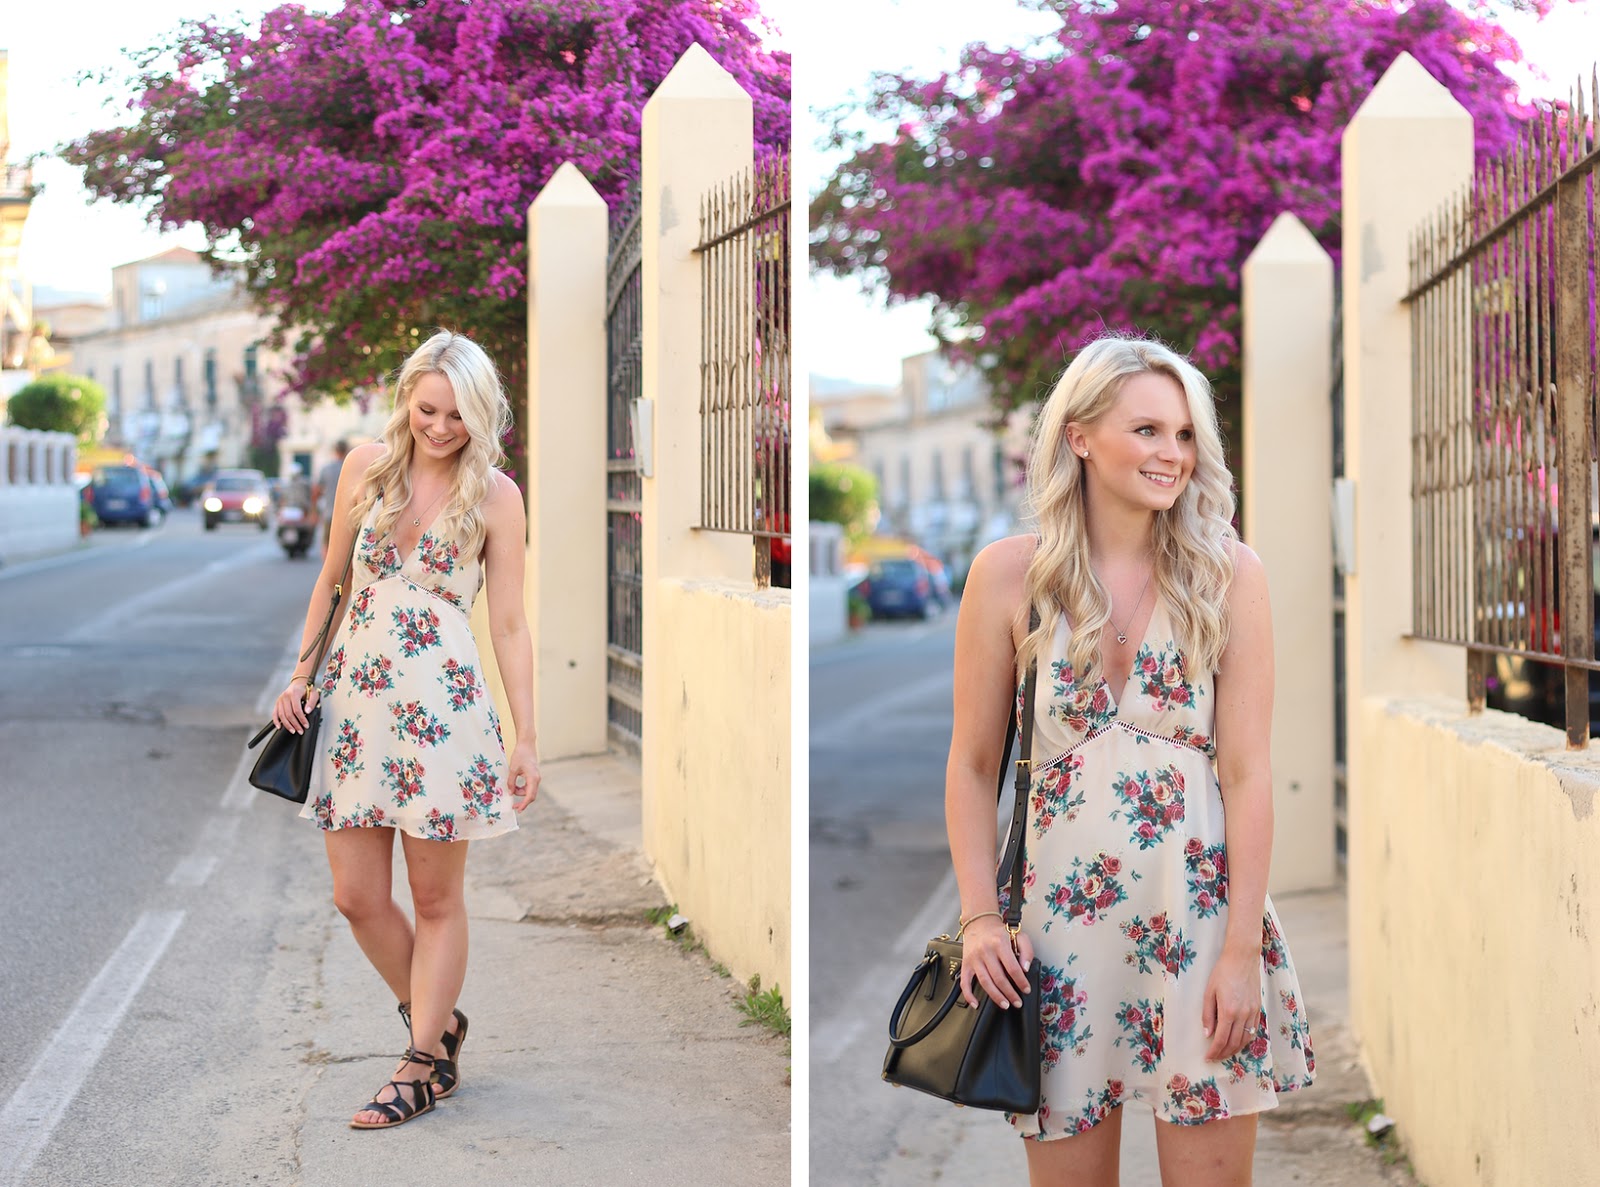 a blonde girl stands in front of purple flowers, wearing a floral dress in italy